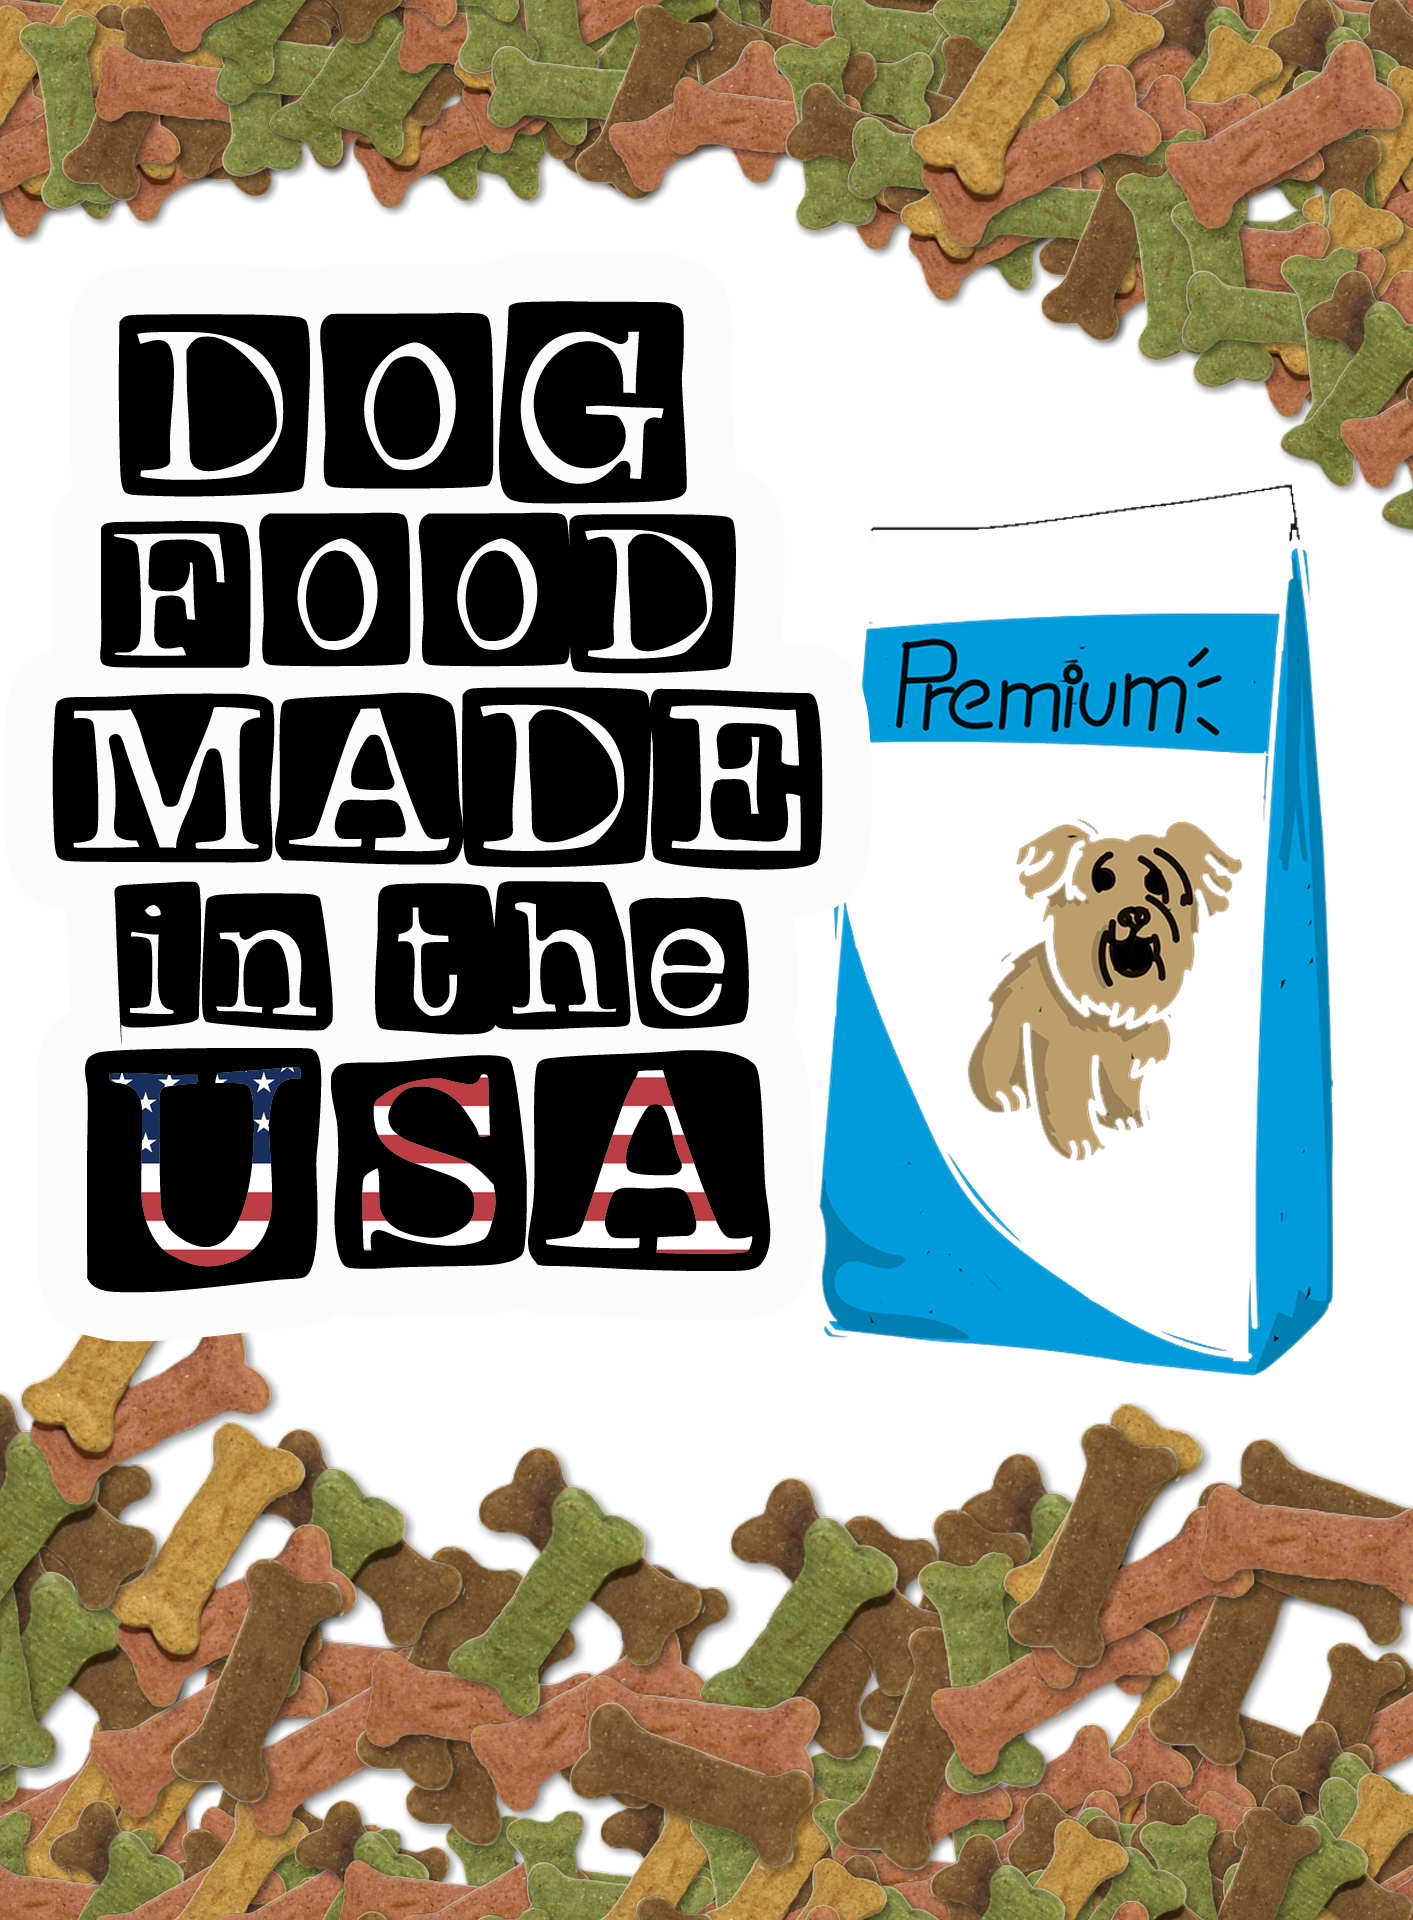 what dog food is made in the usa